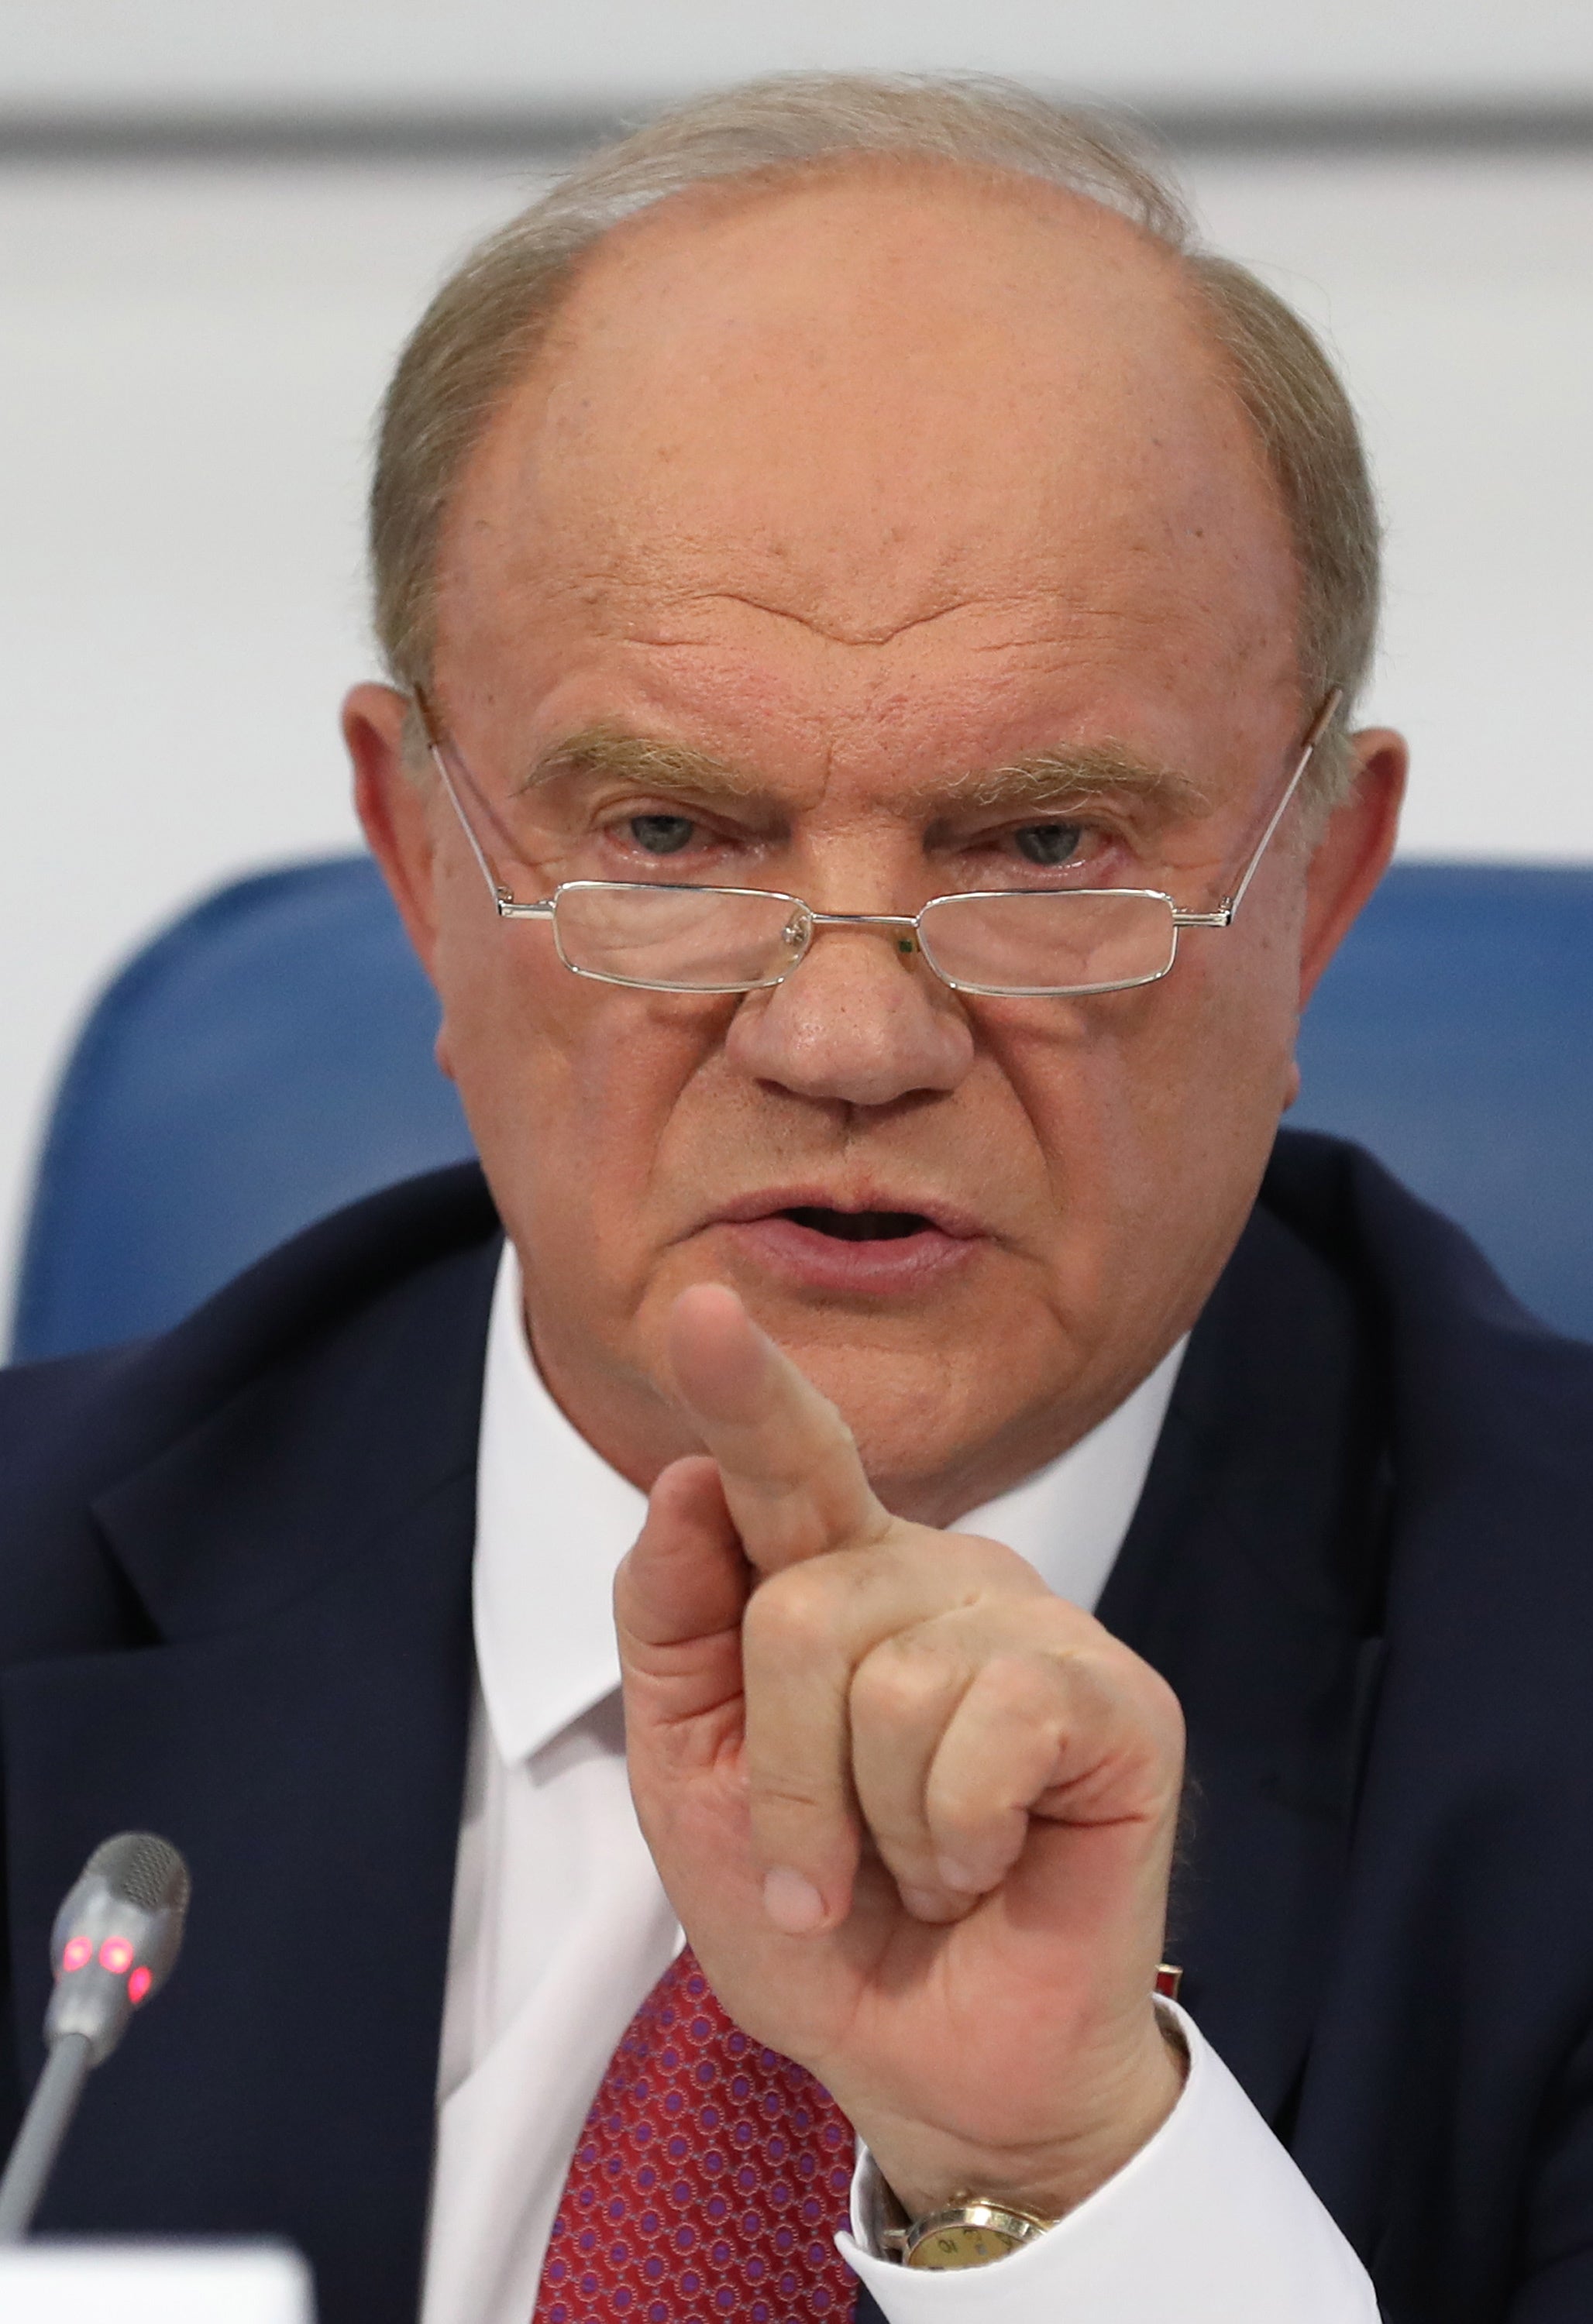 Communist party leader Gennady Zyuganov called for a protest in Moscow on Monday evening